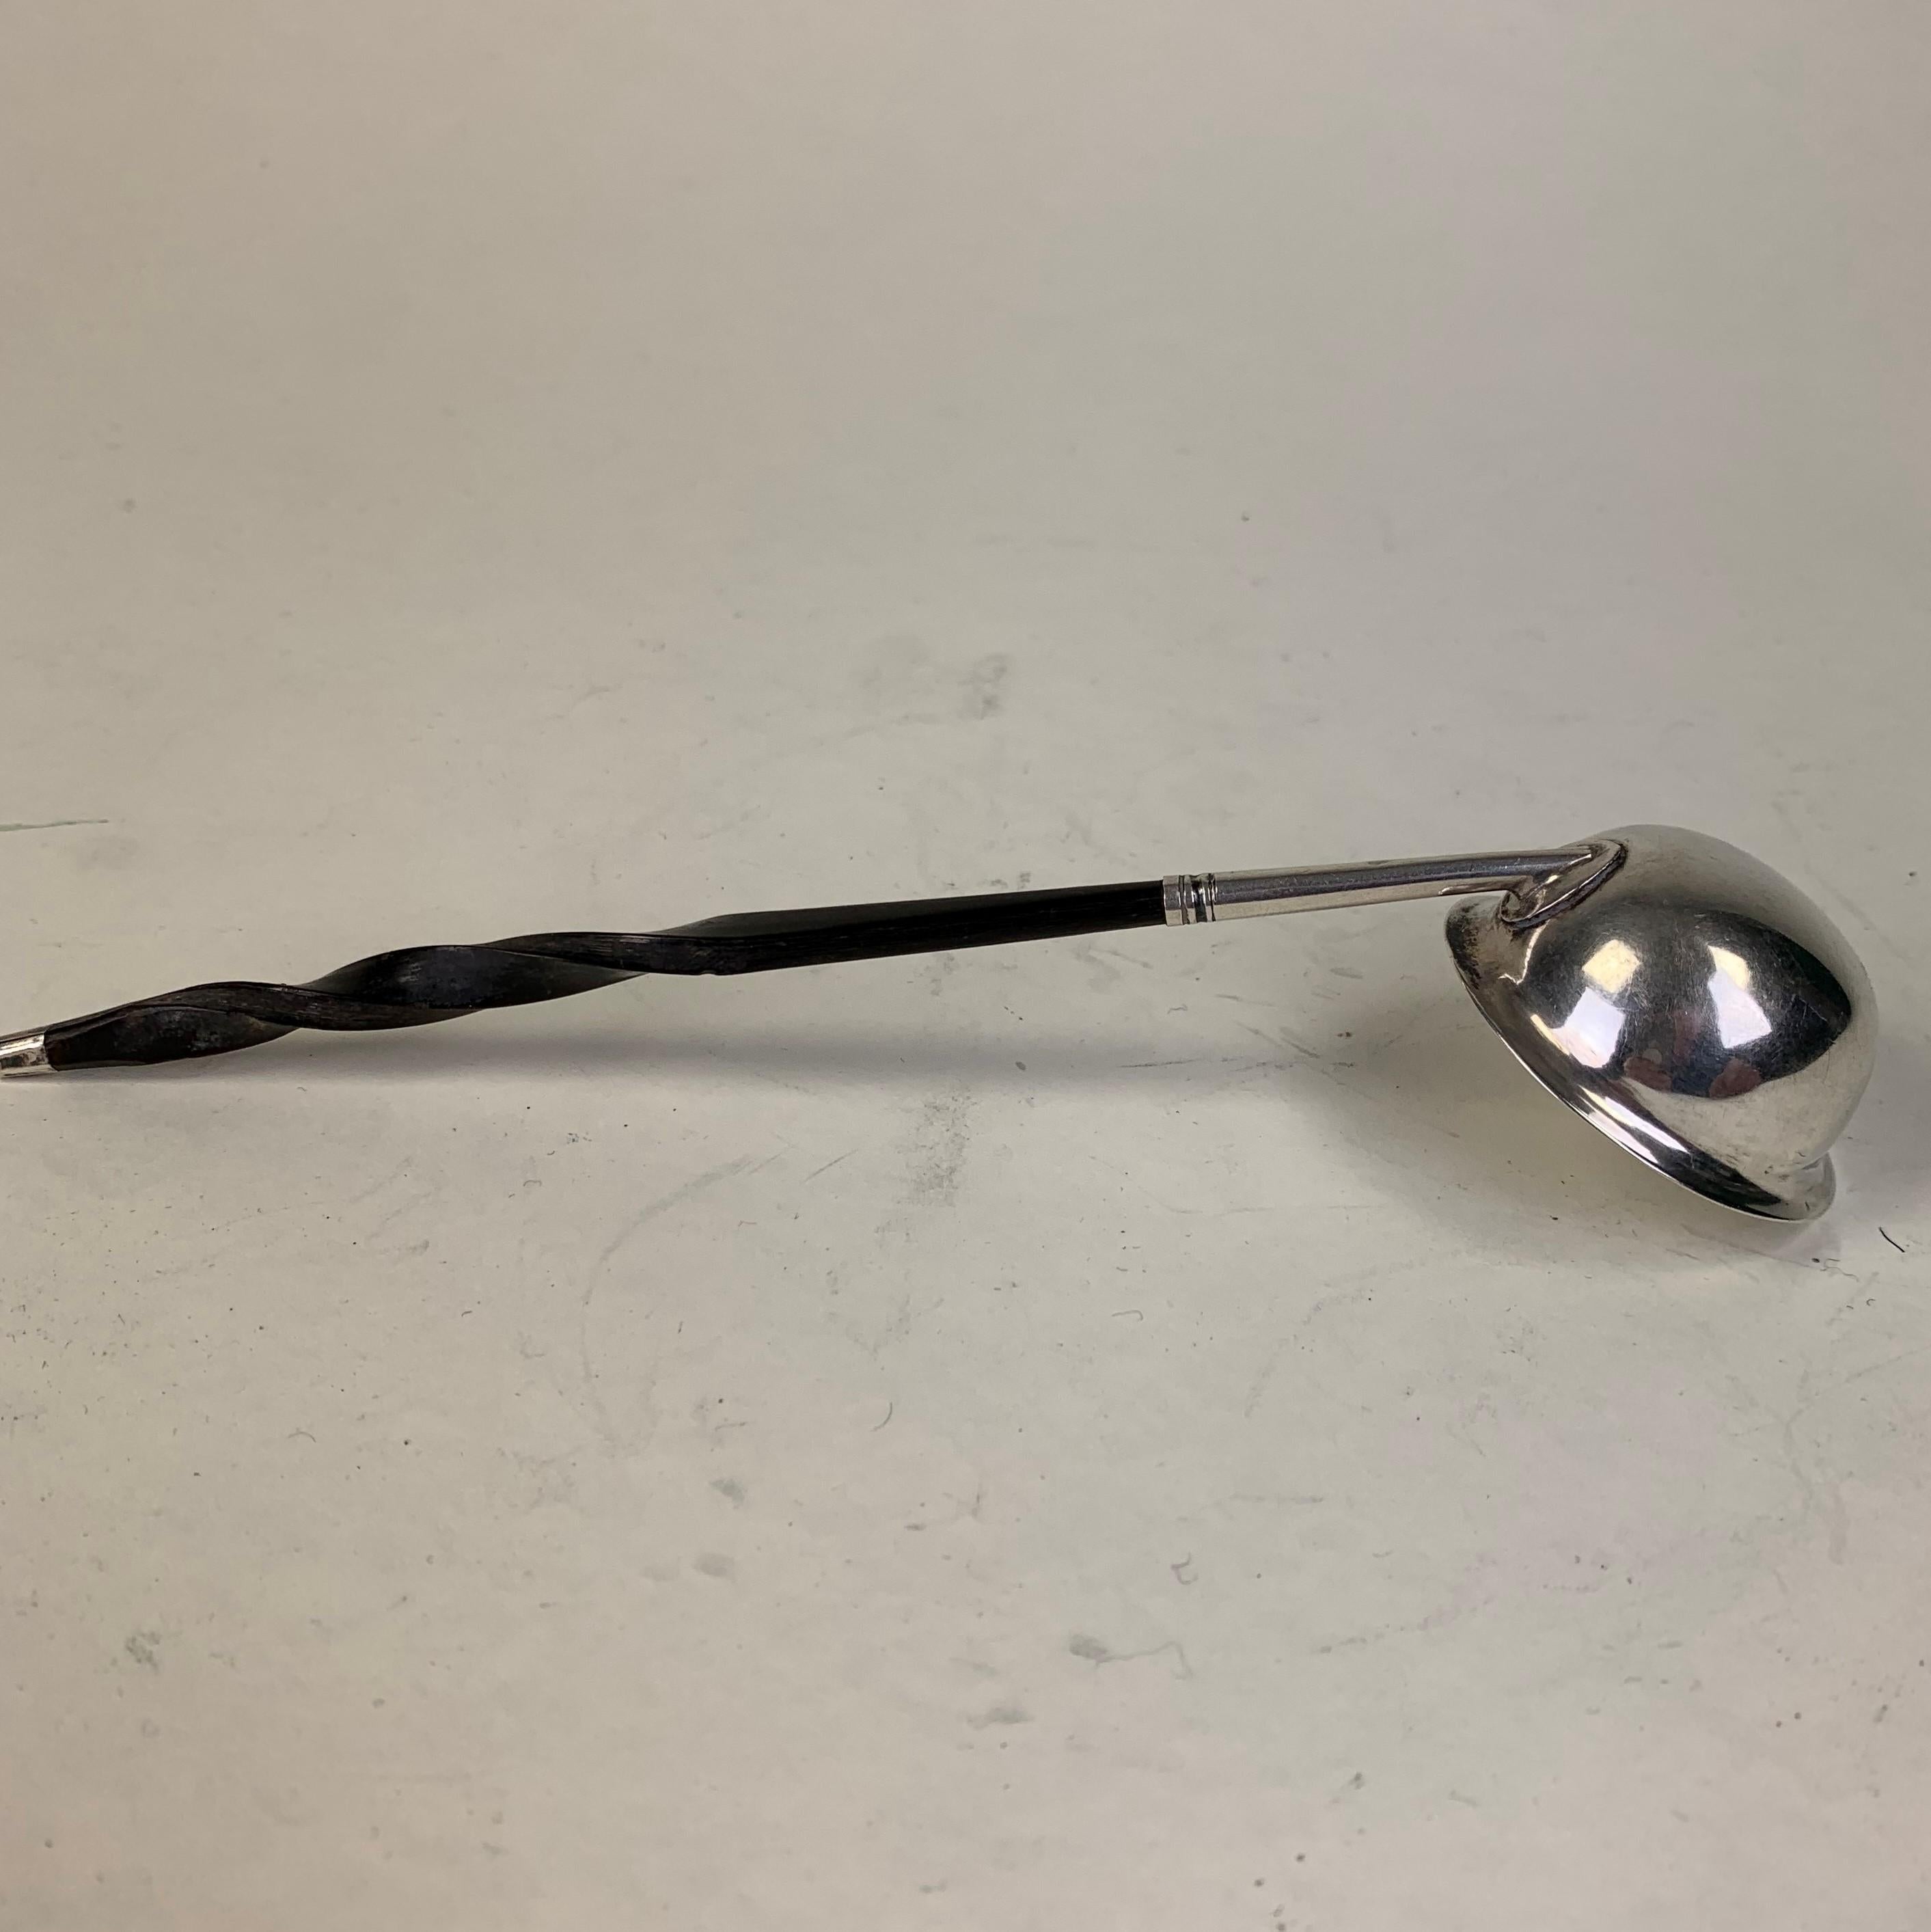 Georgian silver Brandy or Toddy ladle with twisted whalebone handle, in good condition.
Slightly worn hallmarks to the bowl, made by JS/Joshua Snatt, 1801, London.
Measures: 18 cms long 12 grams. Bowl is 14.25 mm diameter.